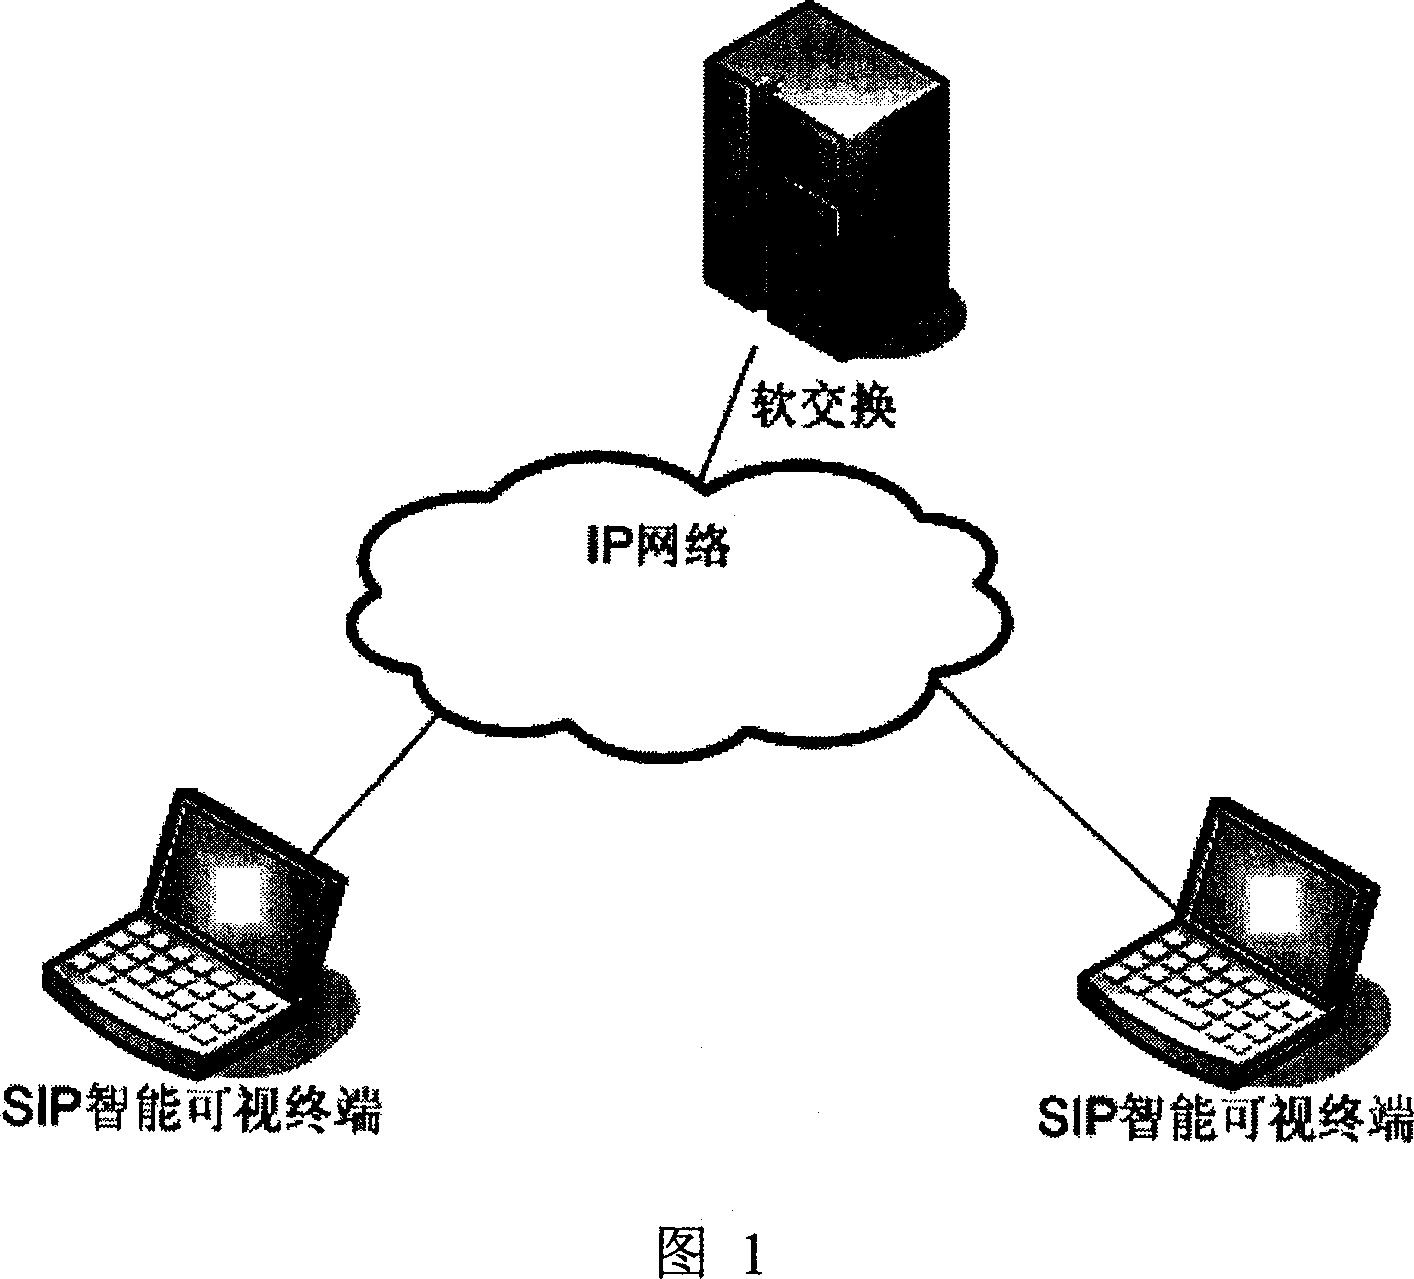 Method for using the intelligent visual terminal to realize the image color ring